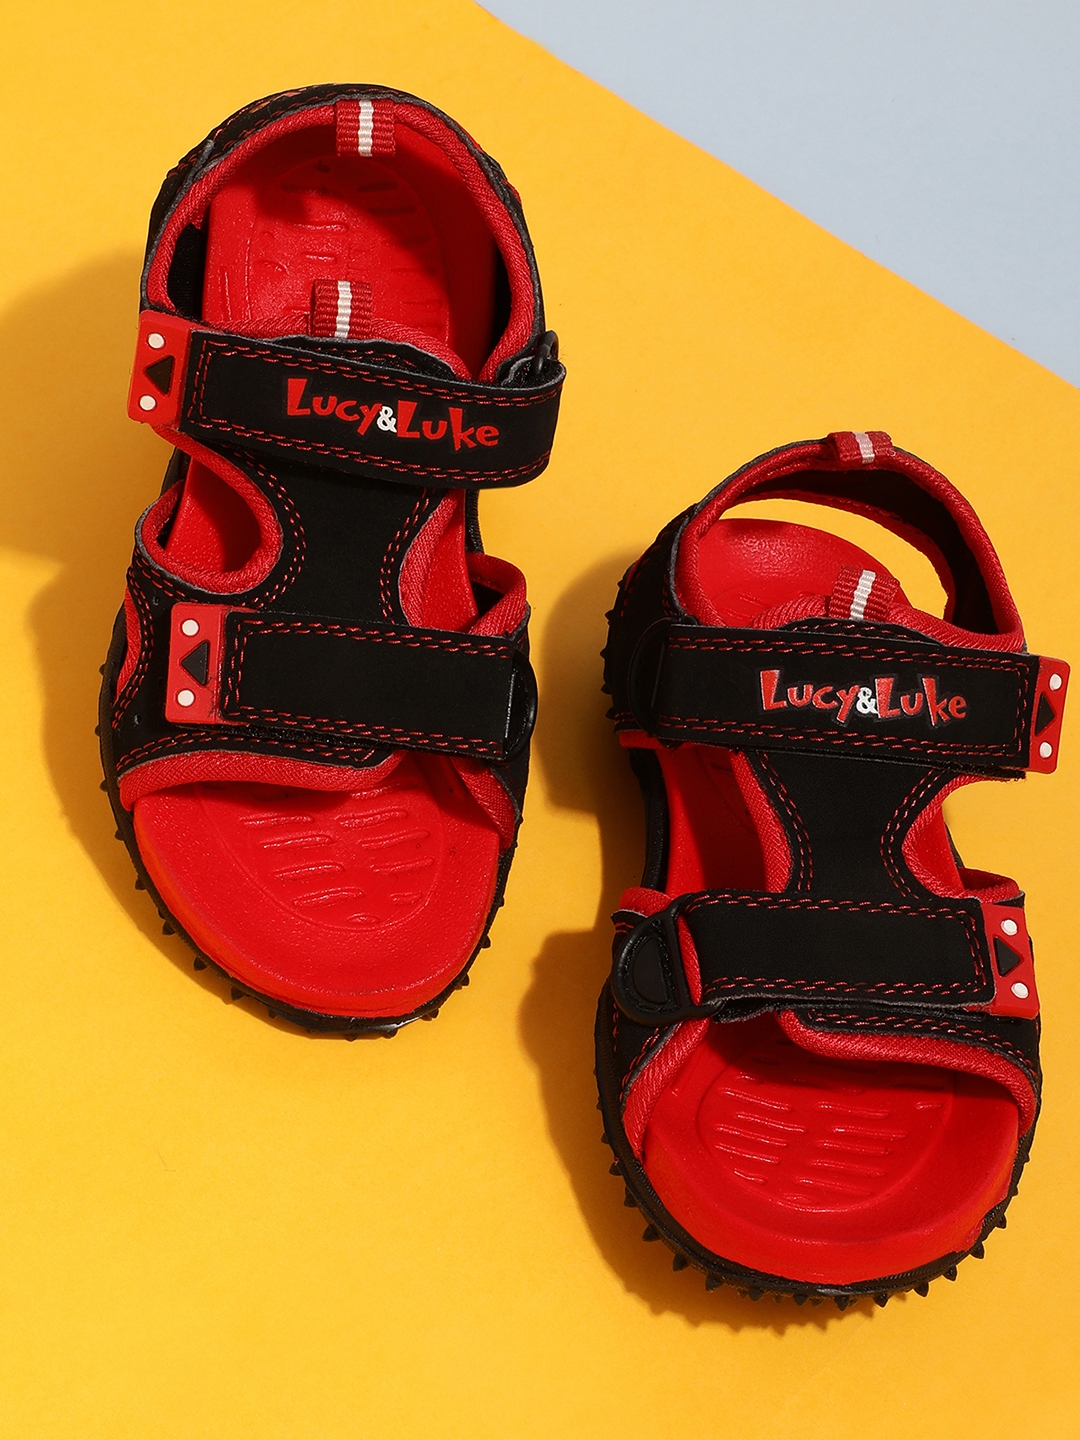 Lucy & Luke by Liberty POLO Black Sandals for Kids